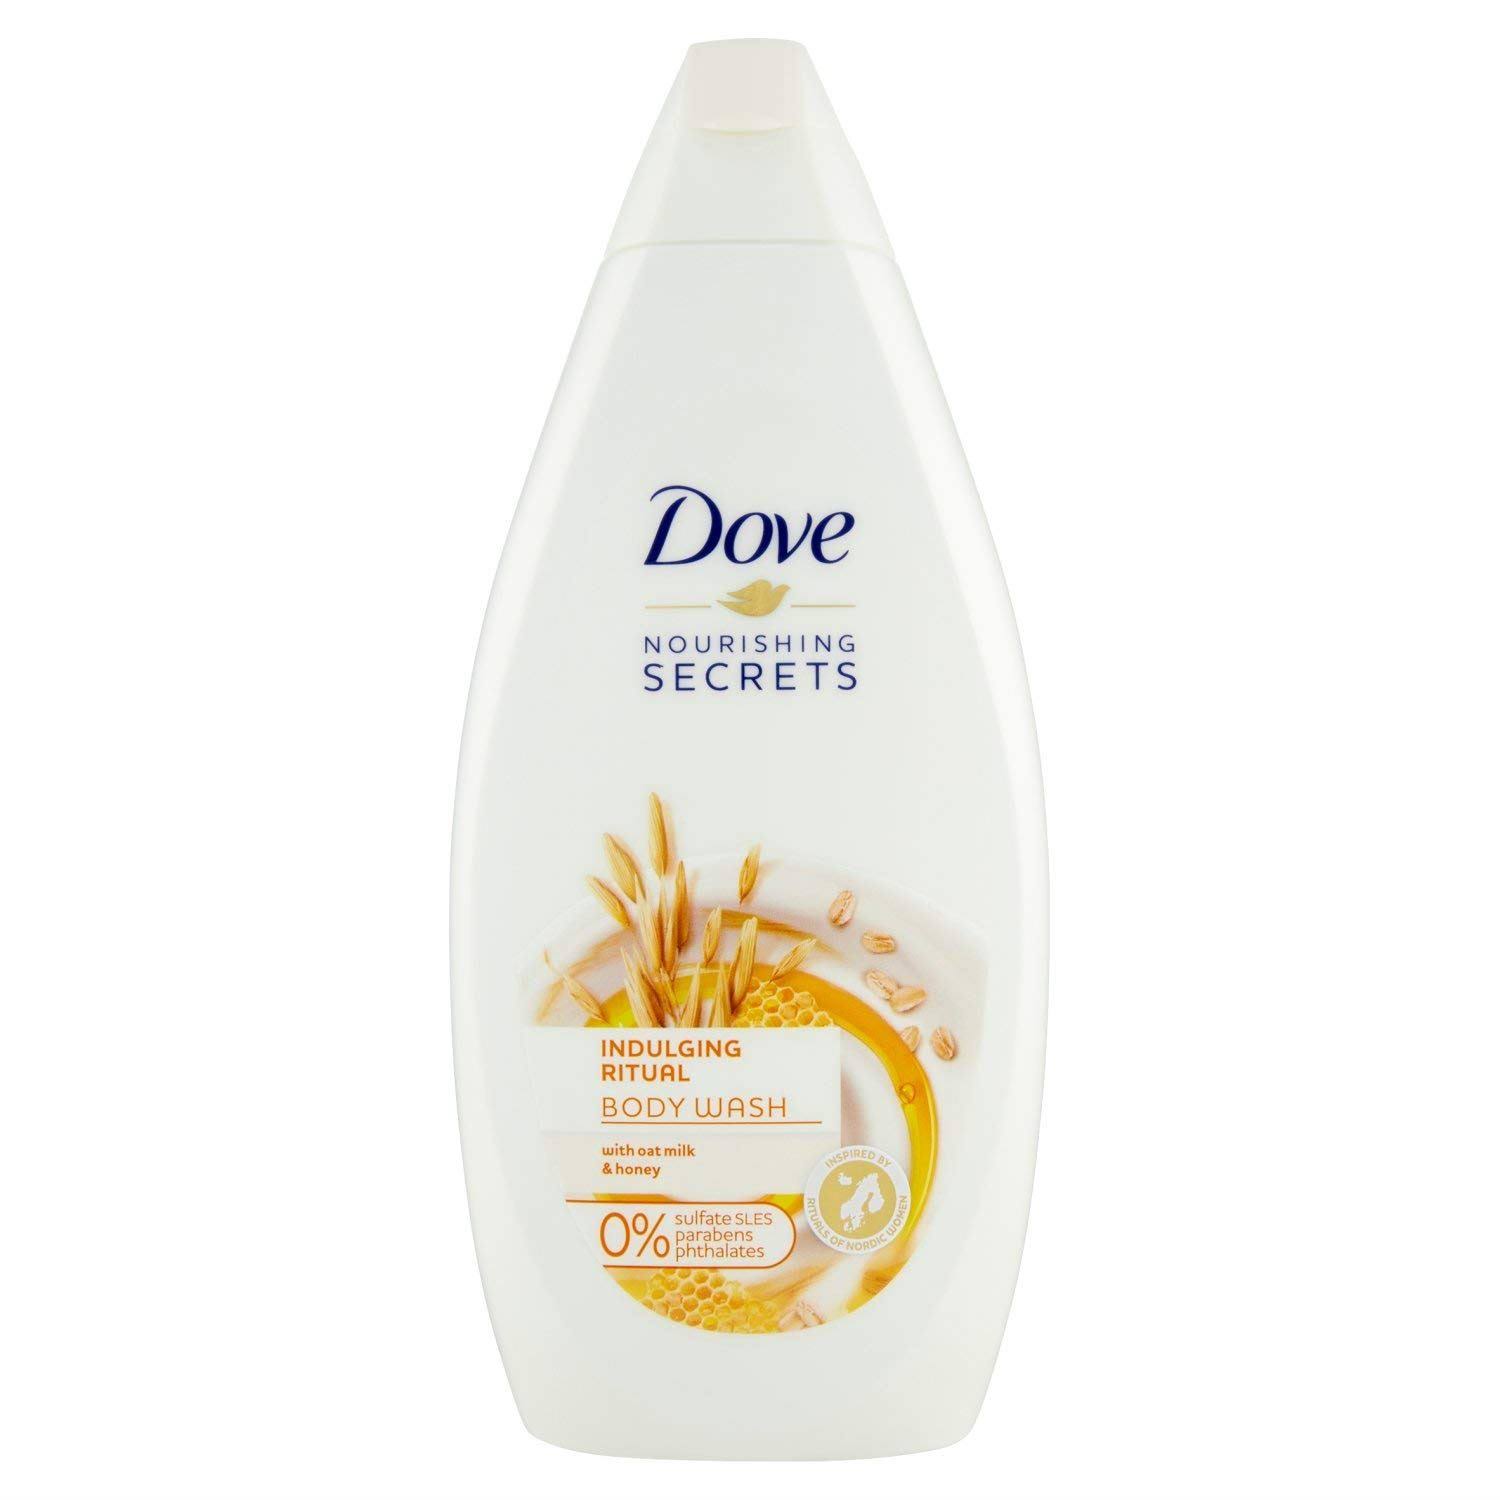 Dove Shower Gel - Oat Milk and Maple Syrup, 500ml